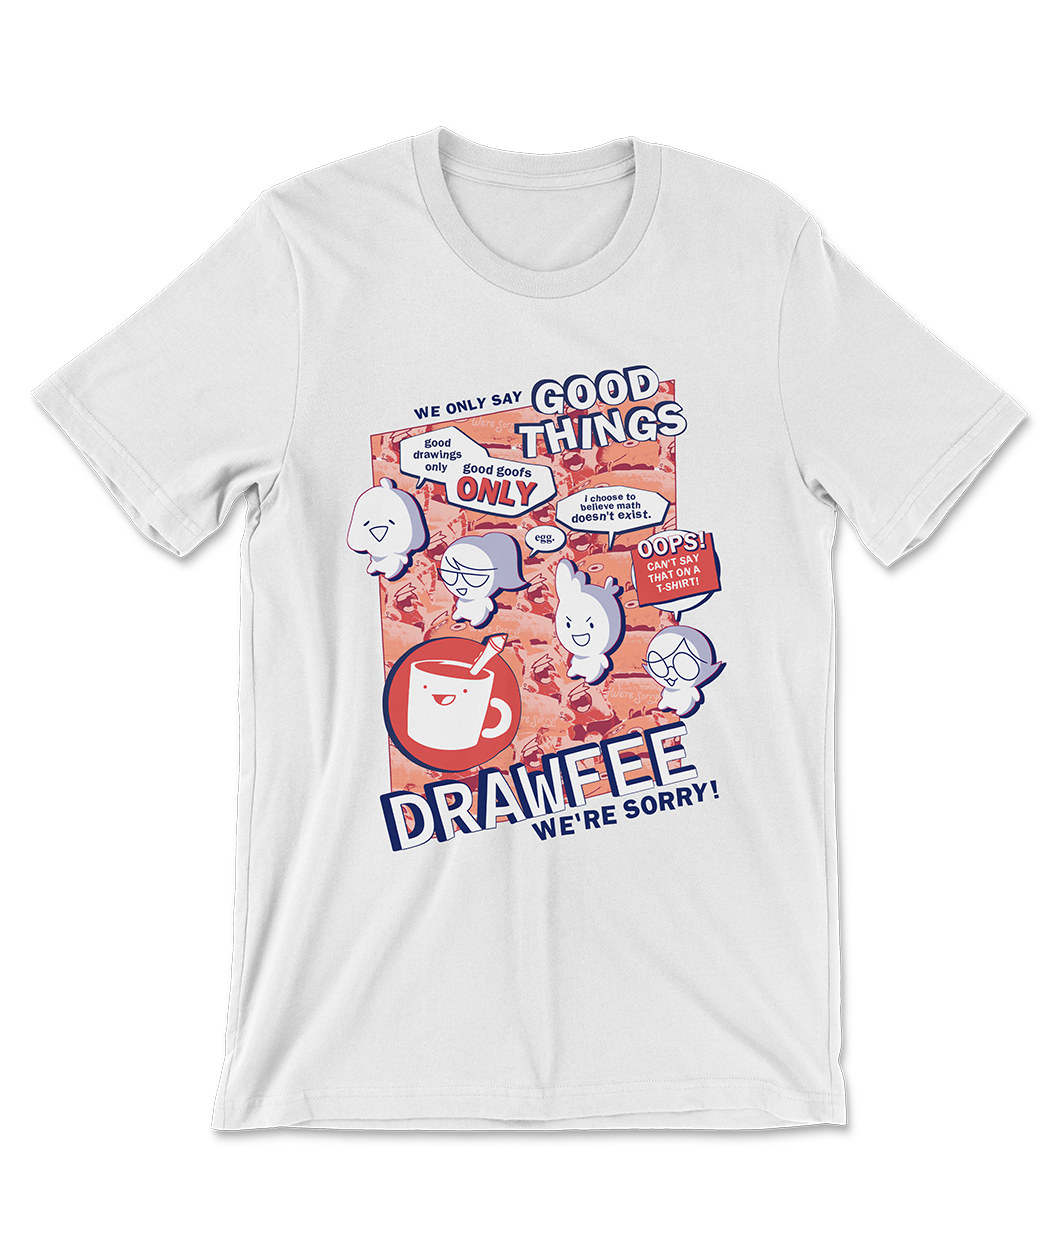 A white t-shirt with different sayings and characters from Drawfee. 